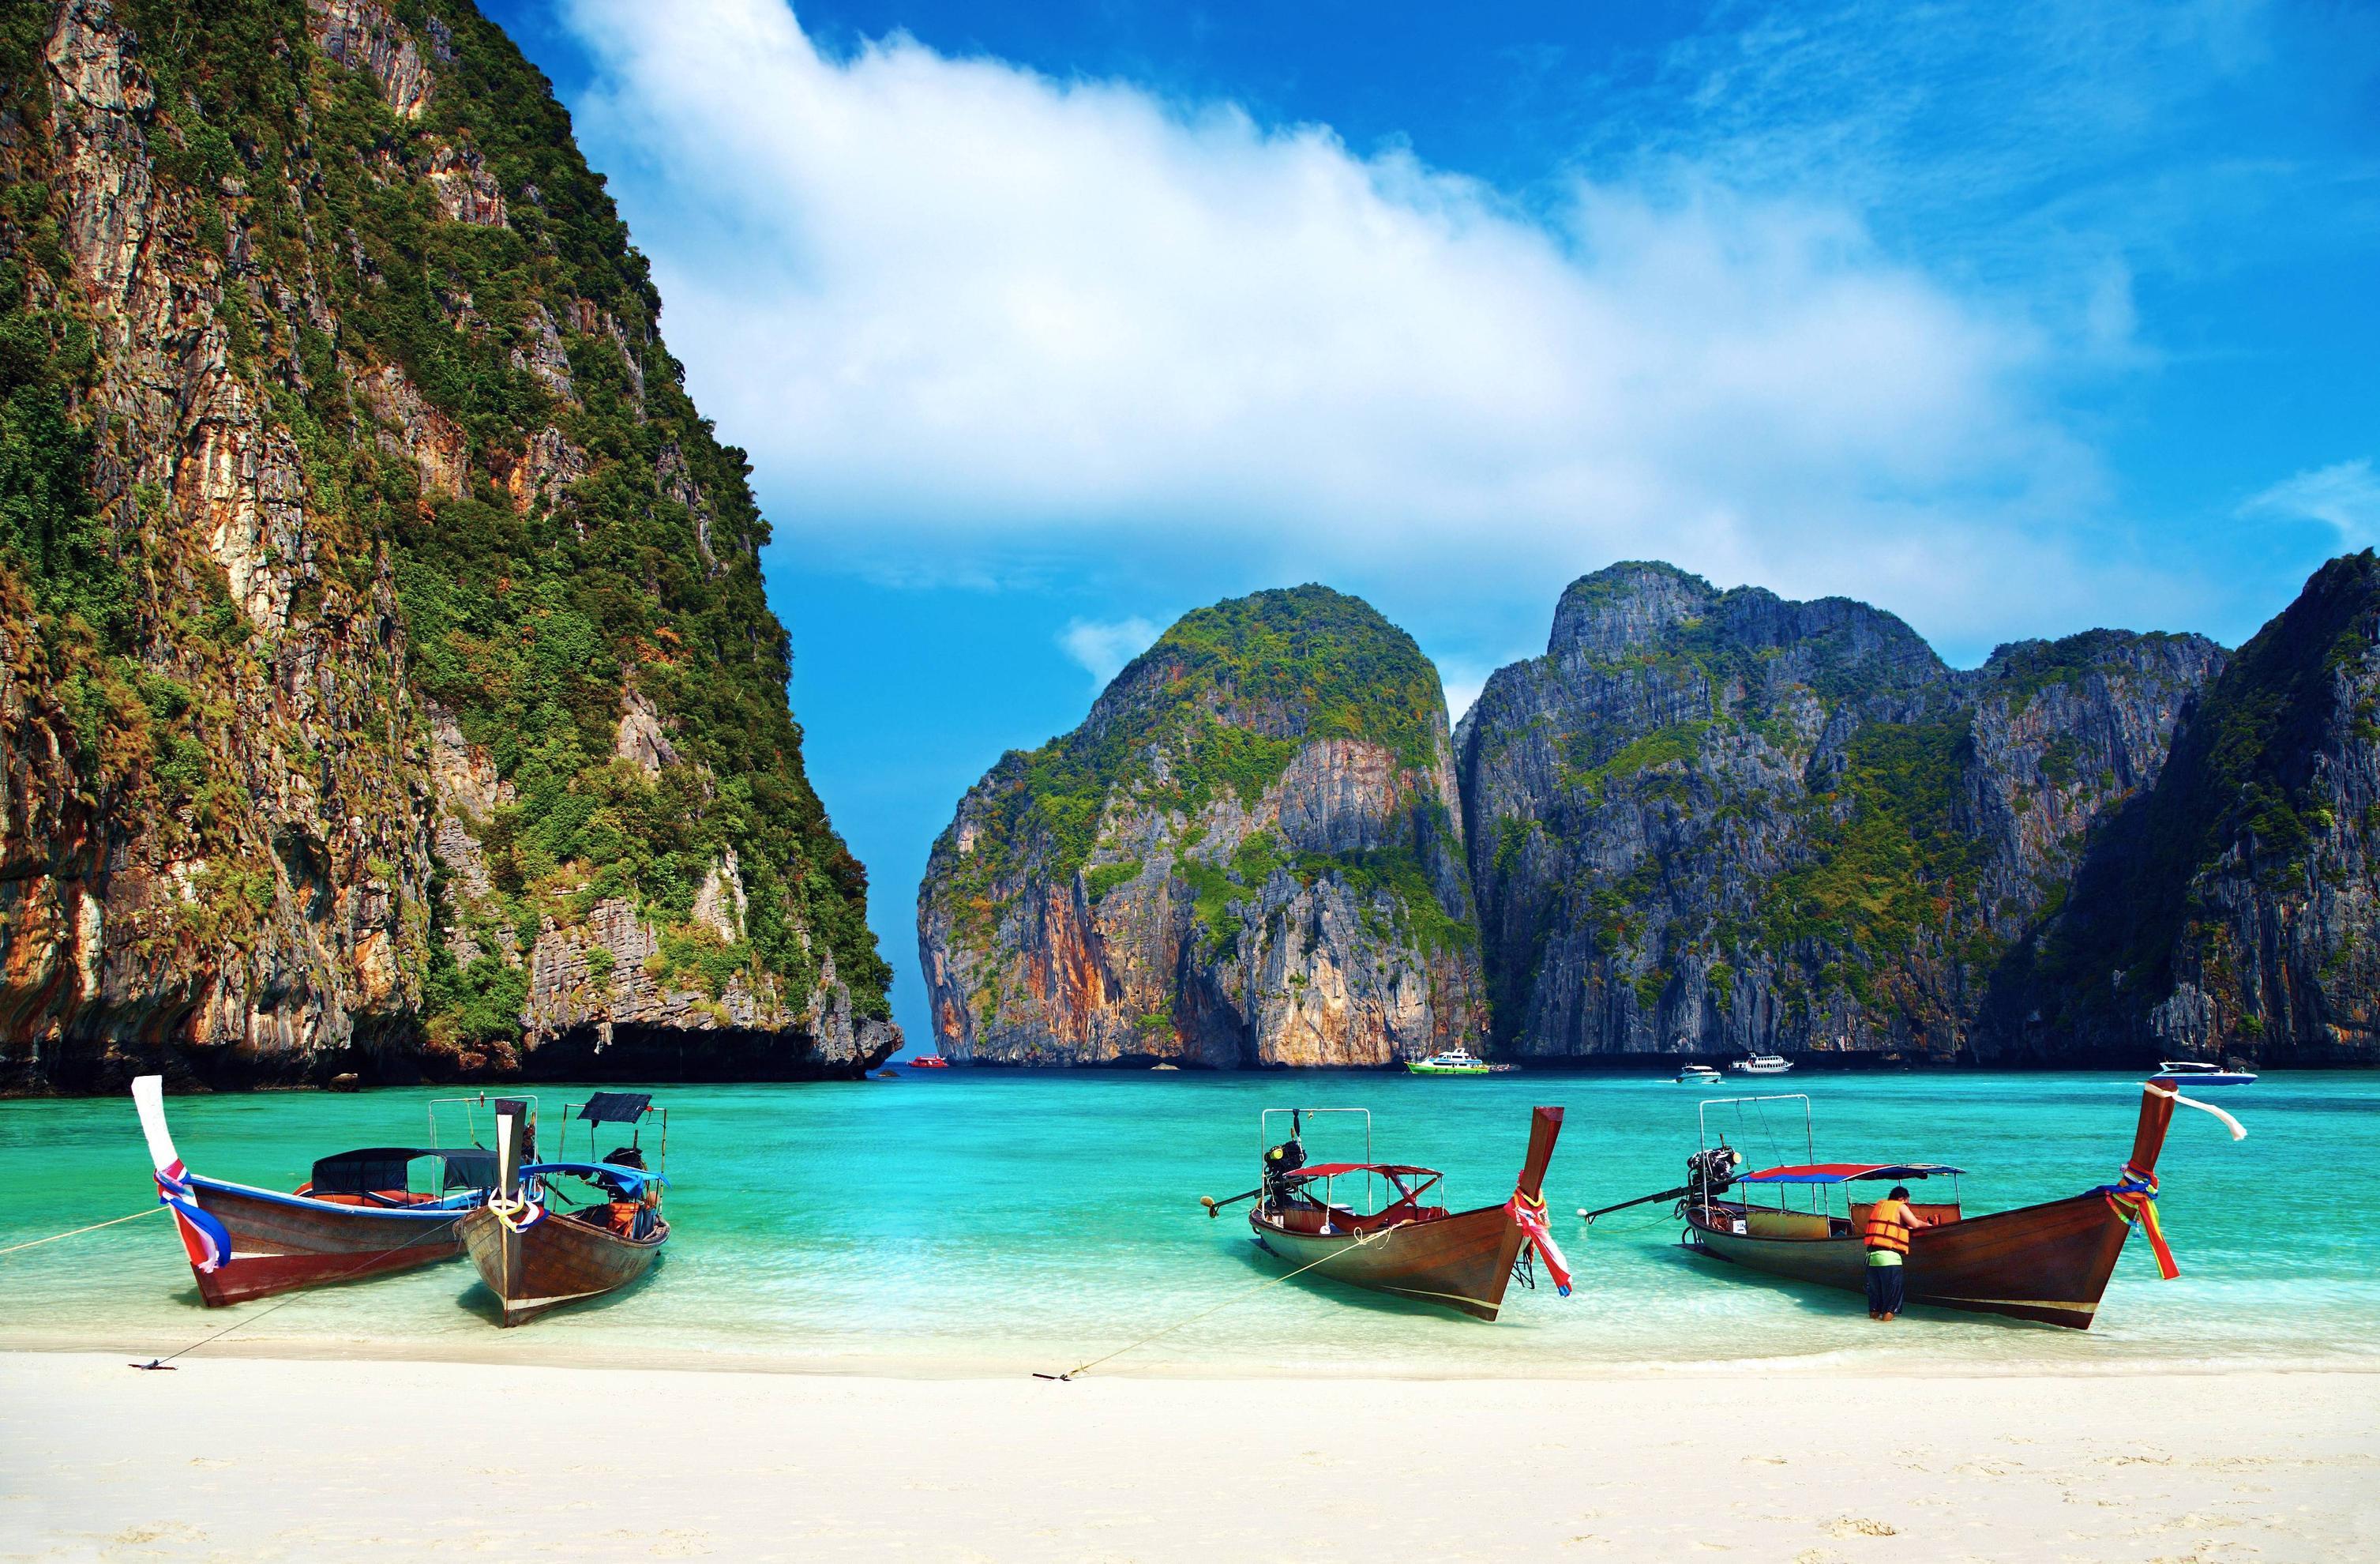 270 Thailand HD Wallpapers and Backgrounds